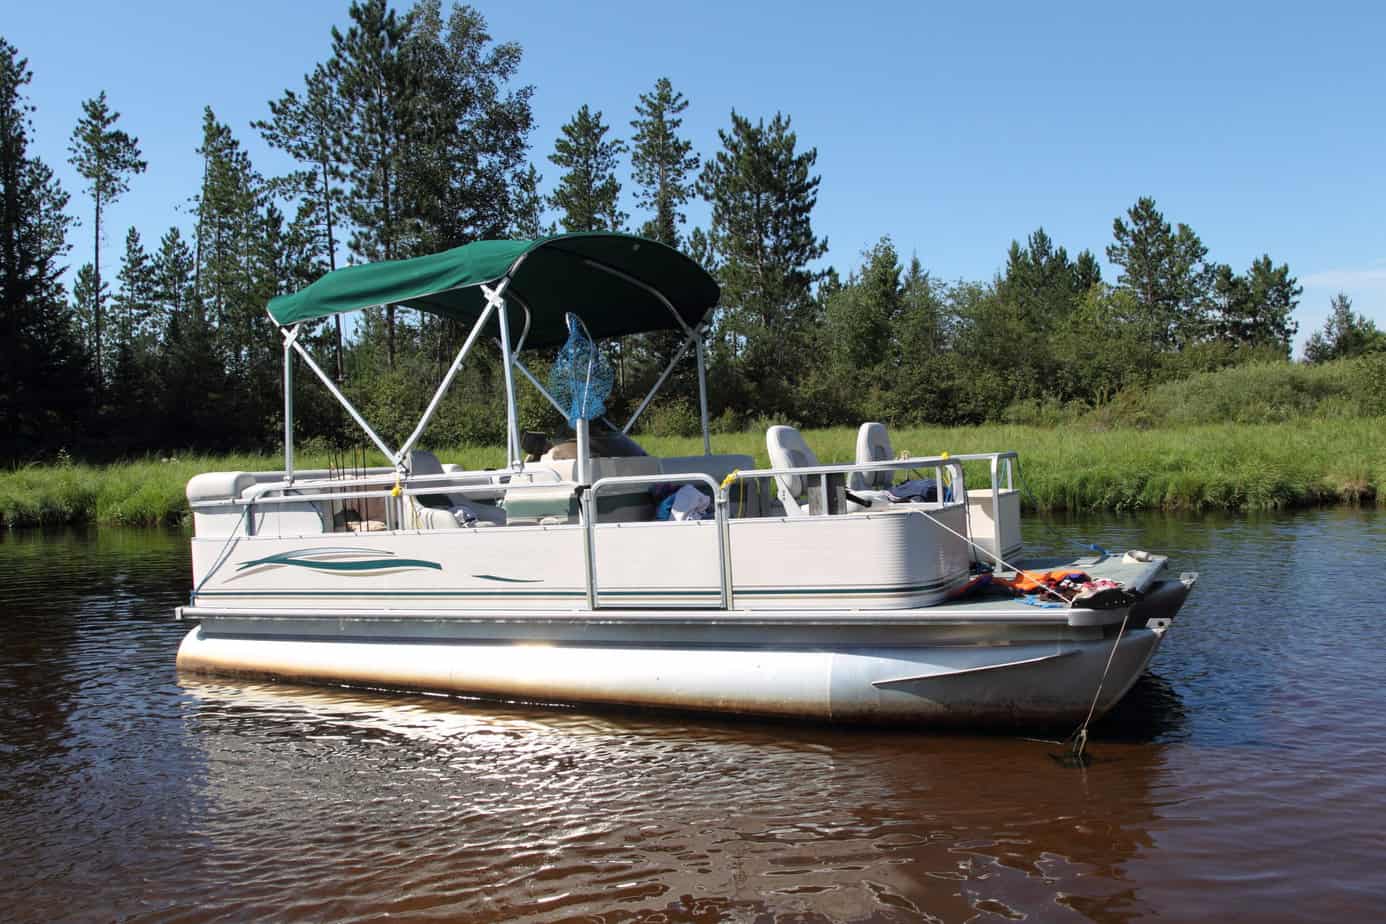 A big pontoon boat anchored in the river with fishing poles and the canopy up.